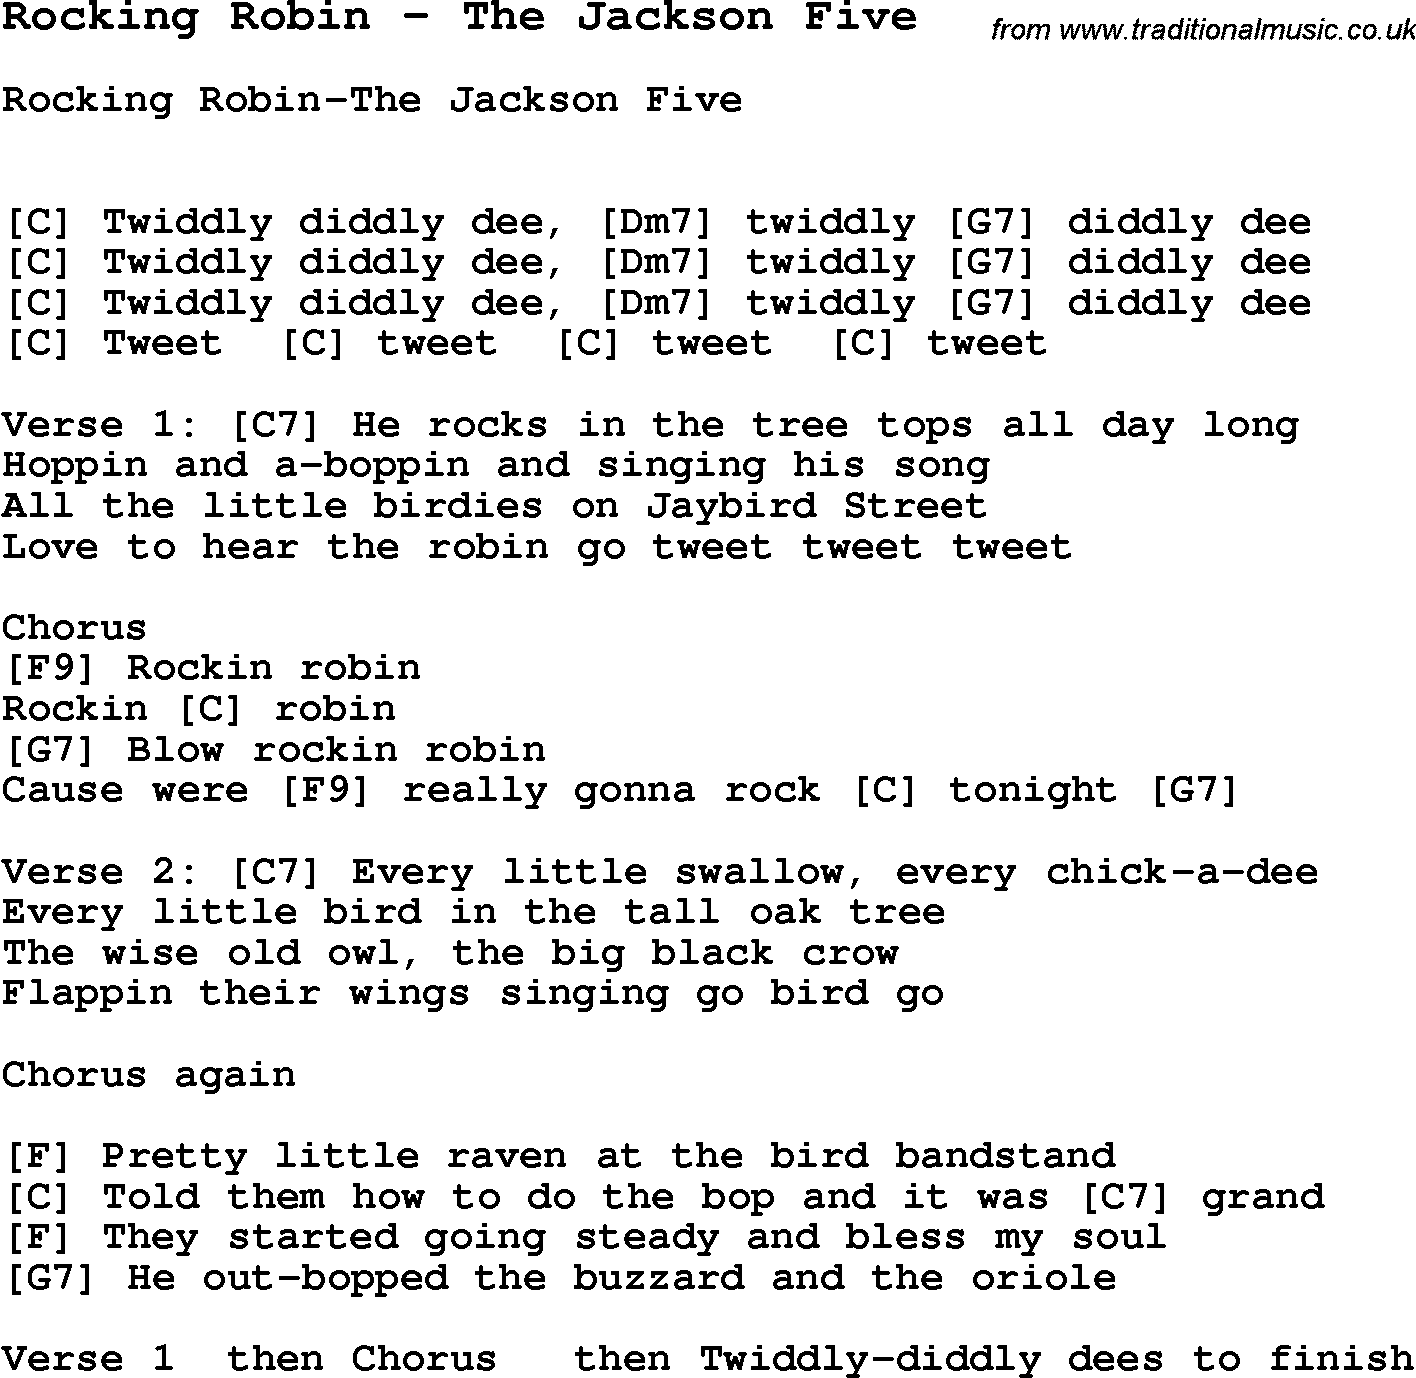 Song Rocking Robin by The Jackson Five, with lyrics for vocal performance and accompaniment chords for Ukulele, Guitar Banjo etc.